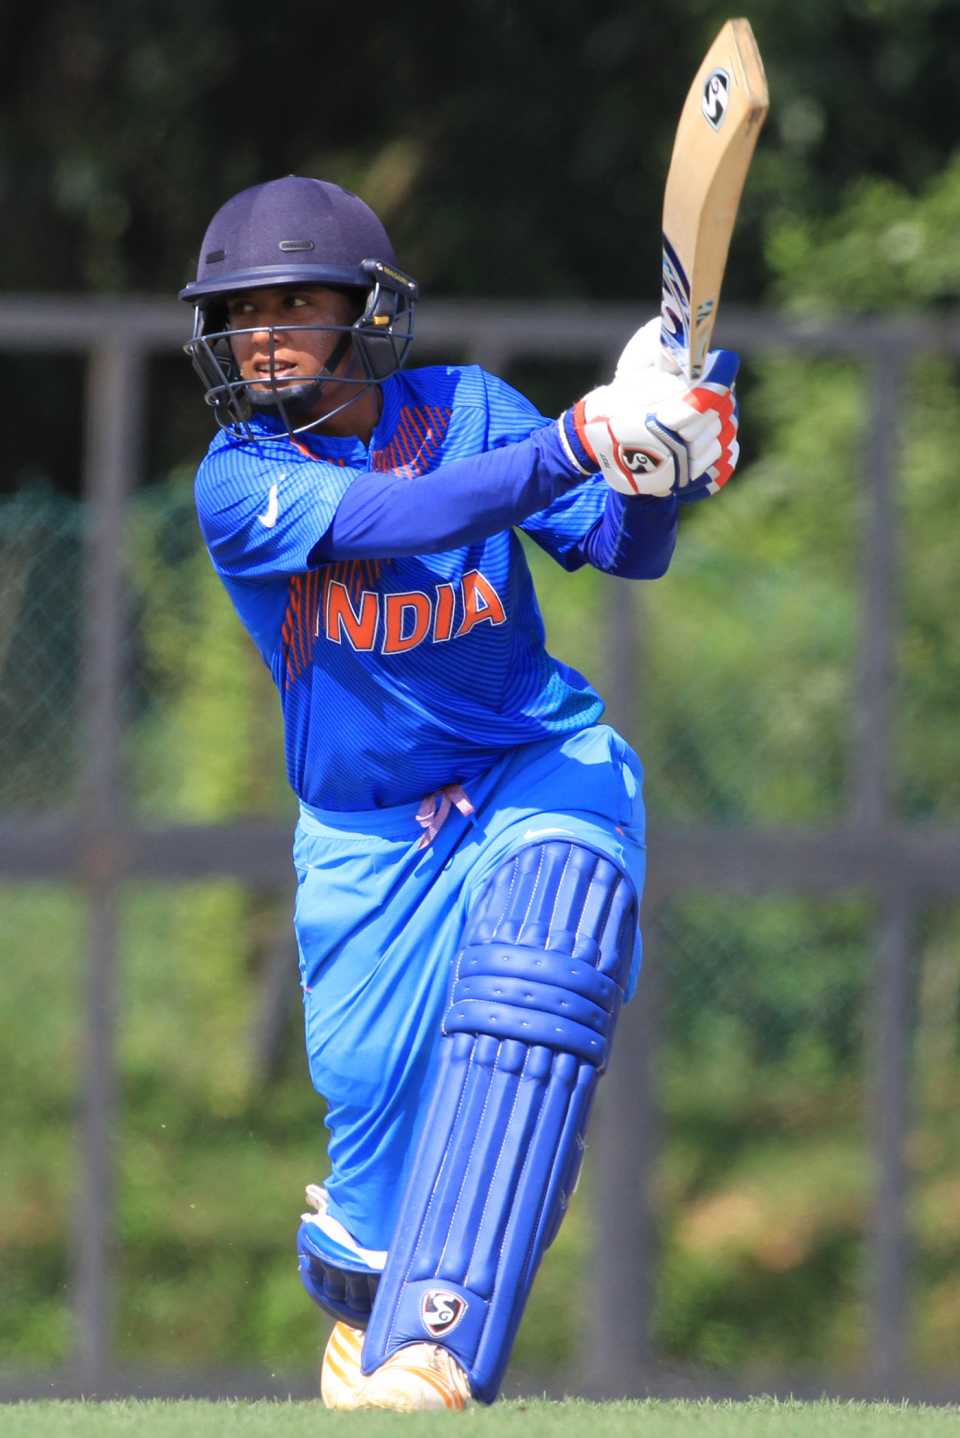 Mithali Raj flays one on the front foot, India v Malaysia, Women's T20 Asia Cup 2018, May 3, 2018, Kuala Lumpur